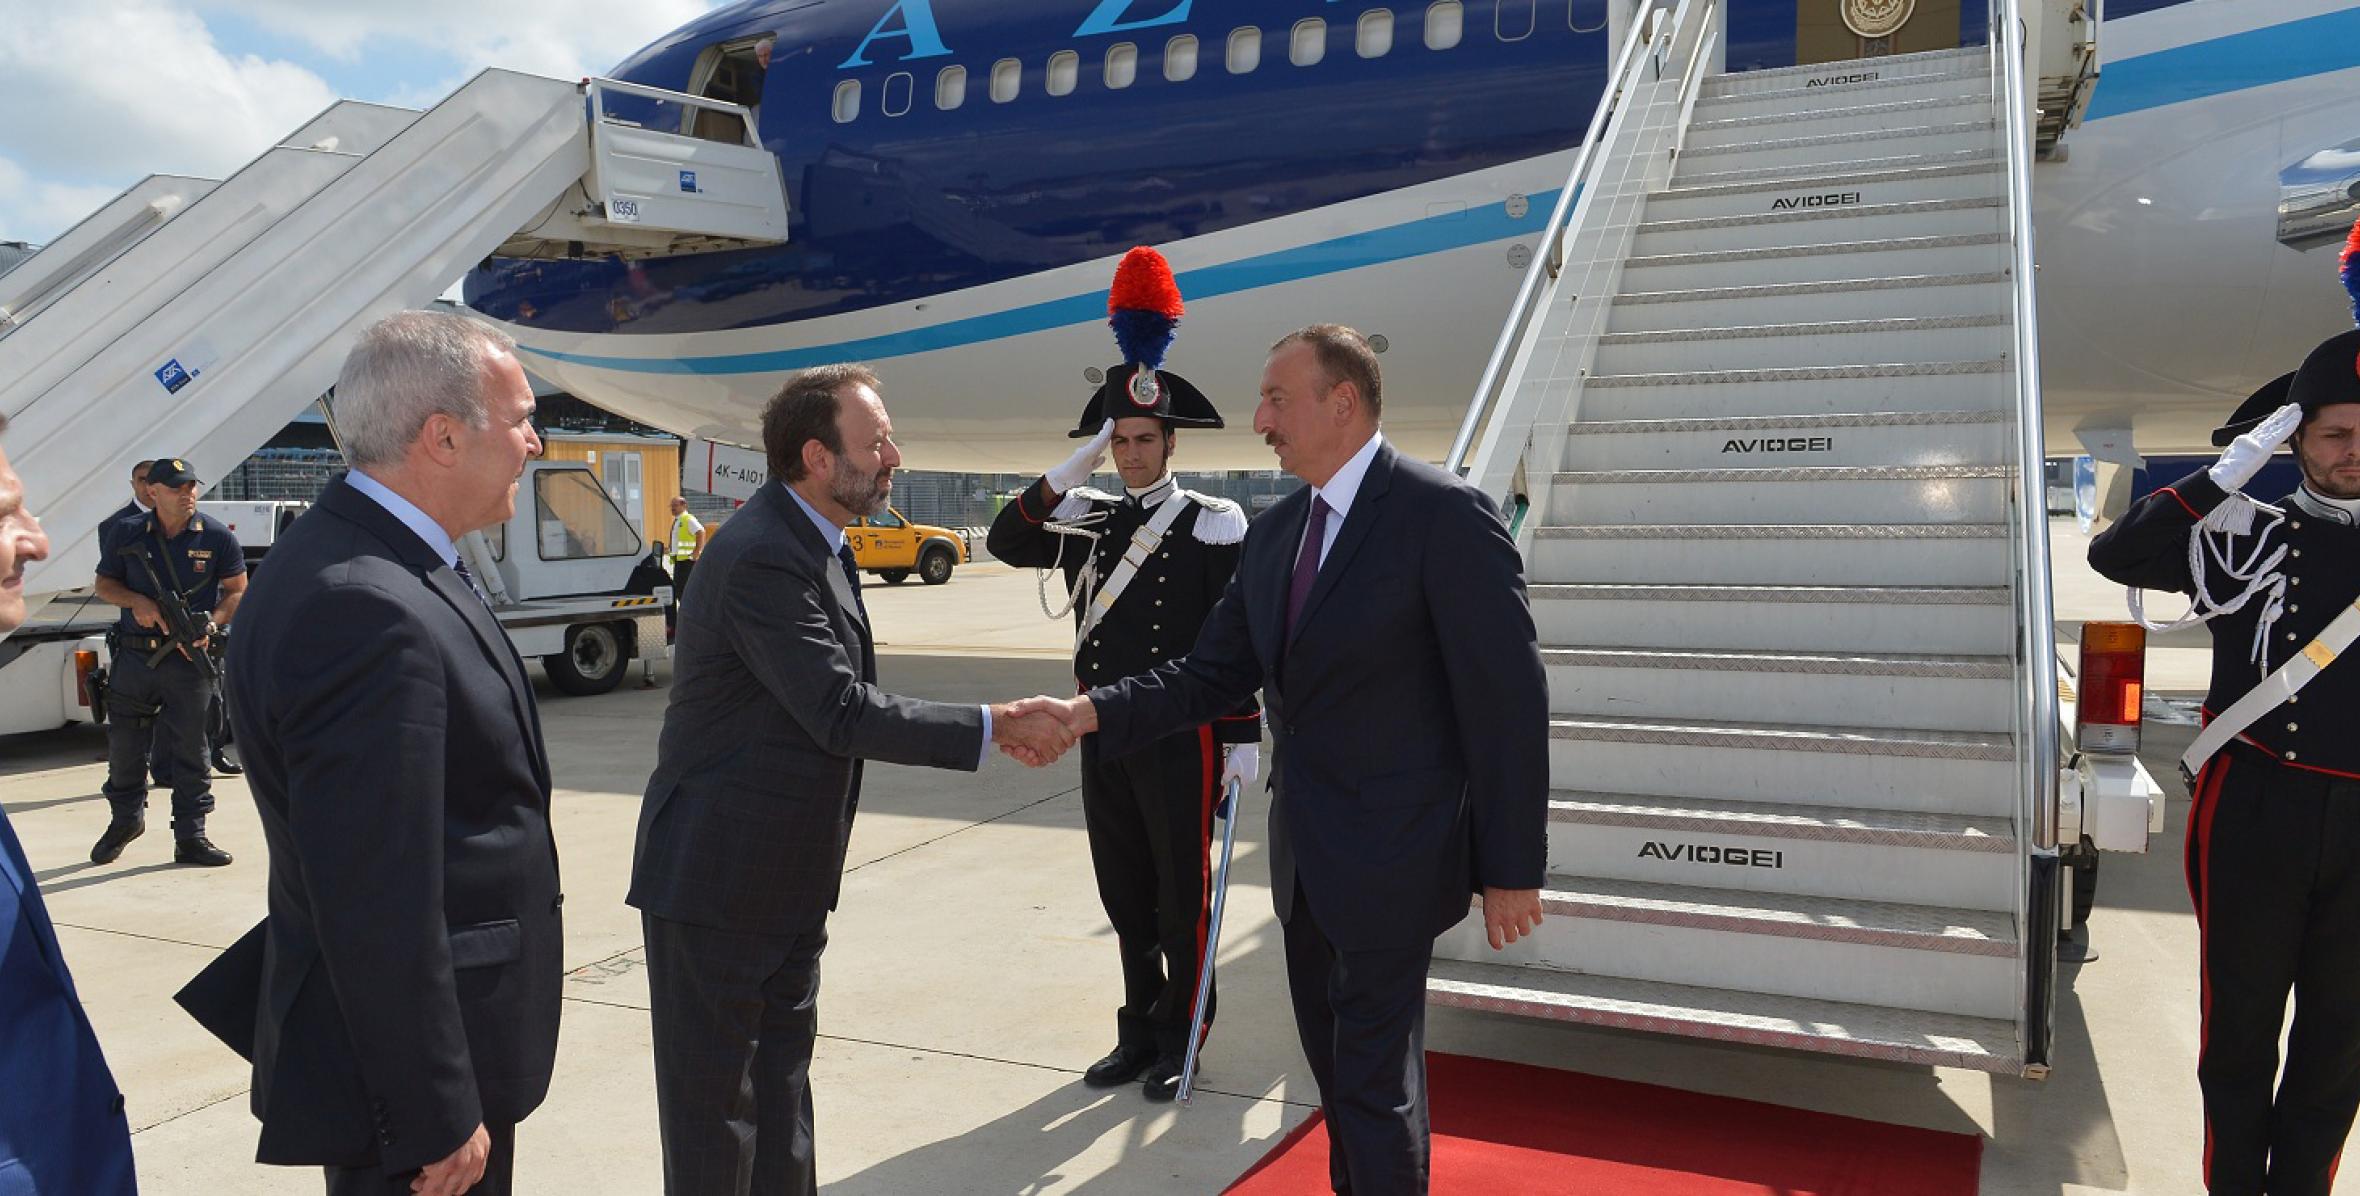 Ilham Aliyev arrived in Italy on an official visit